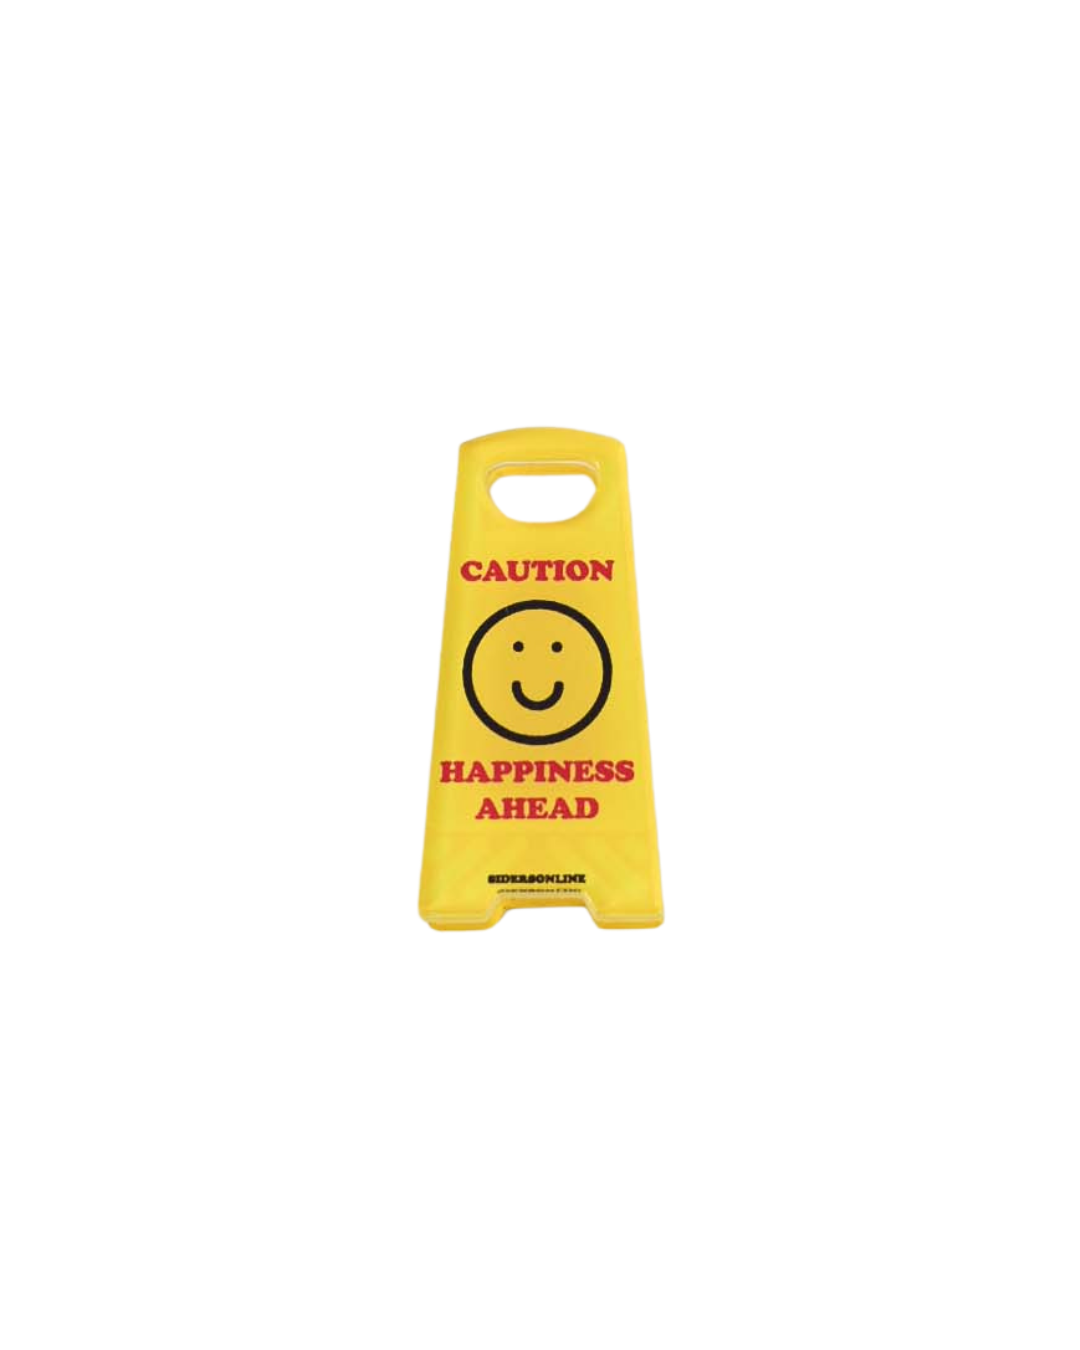 Happiness Ahead Standee Desk Clip